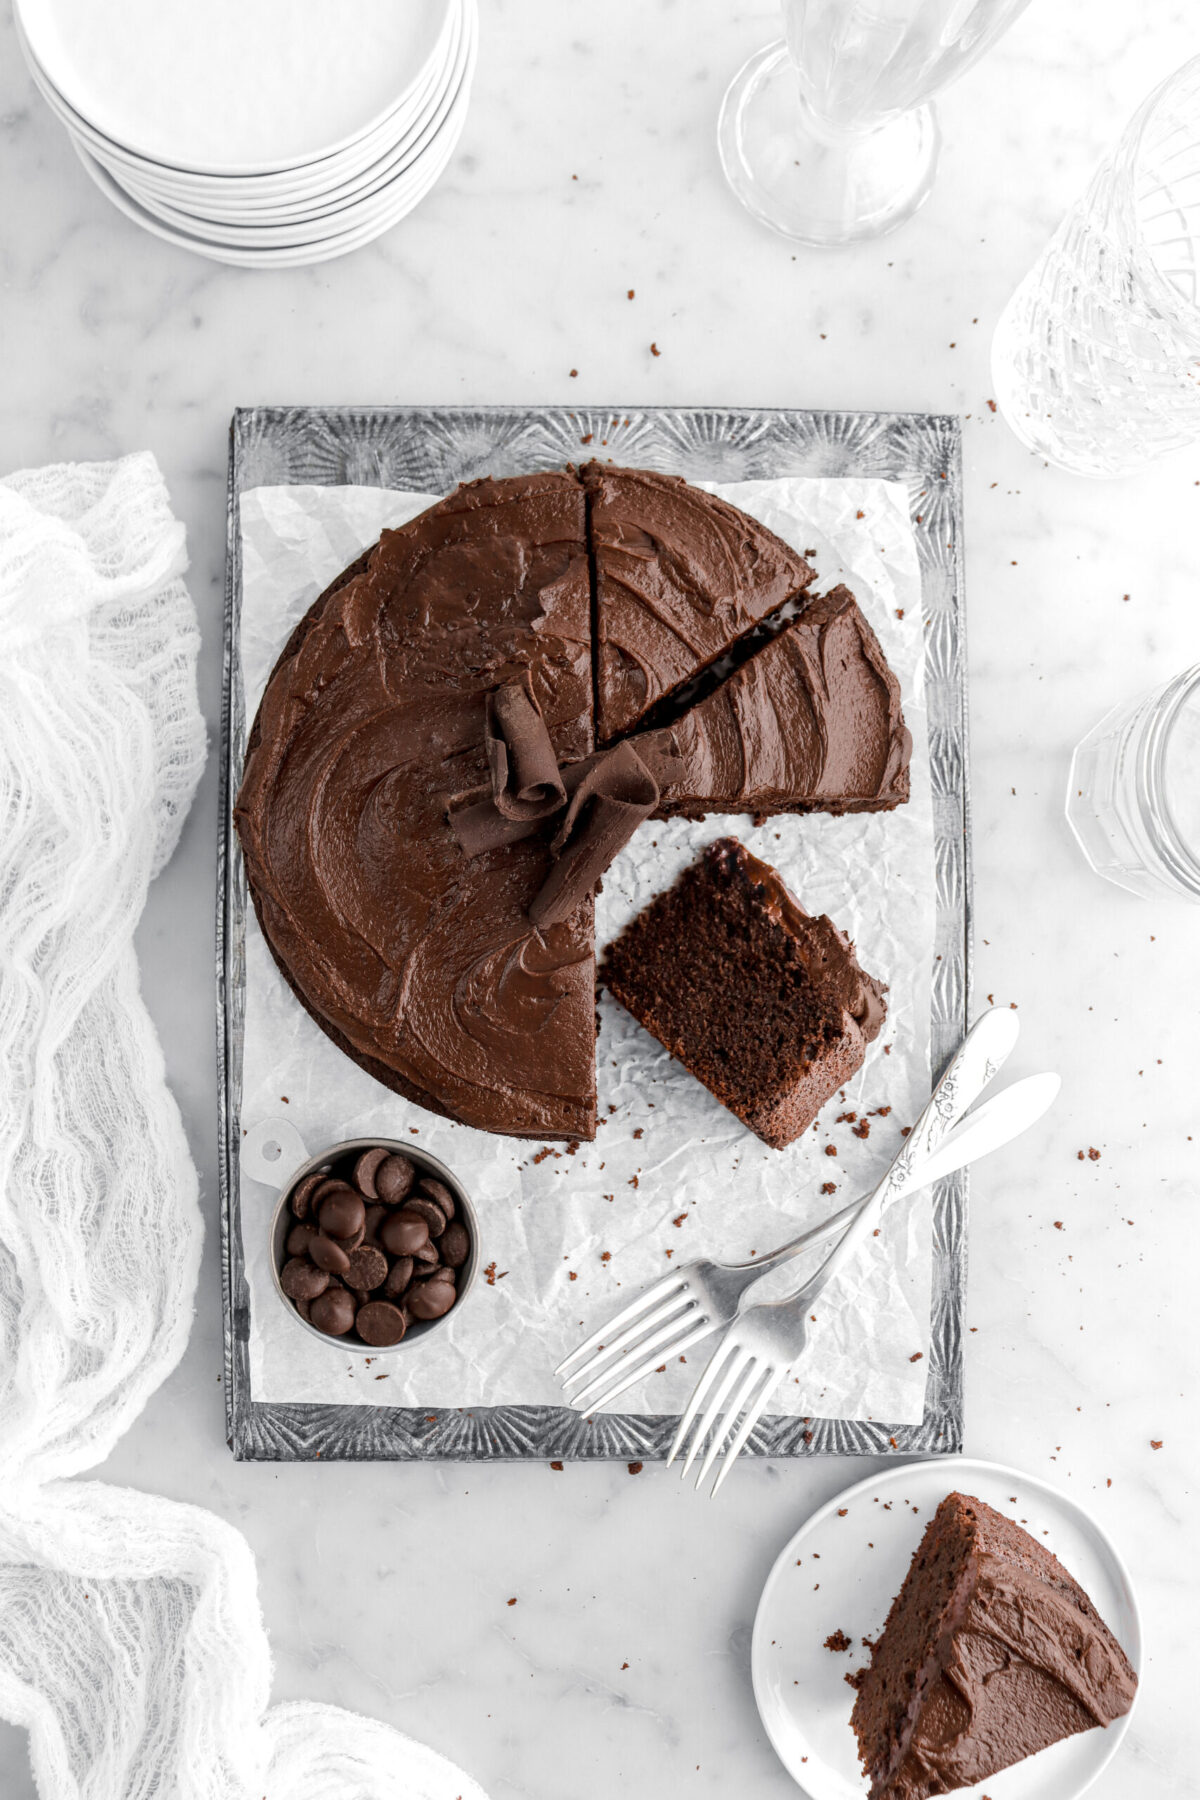 overhead image of chocolate cake with three slices next to cake with one turned on its side, a measuring cup of chocolate chips, two forks, and a slice of cake on white plate on marble surface.